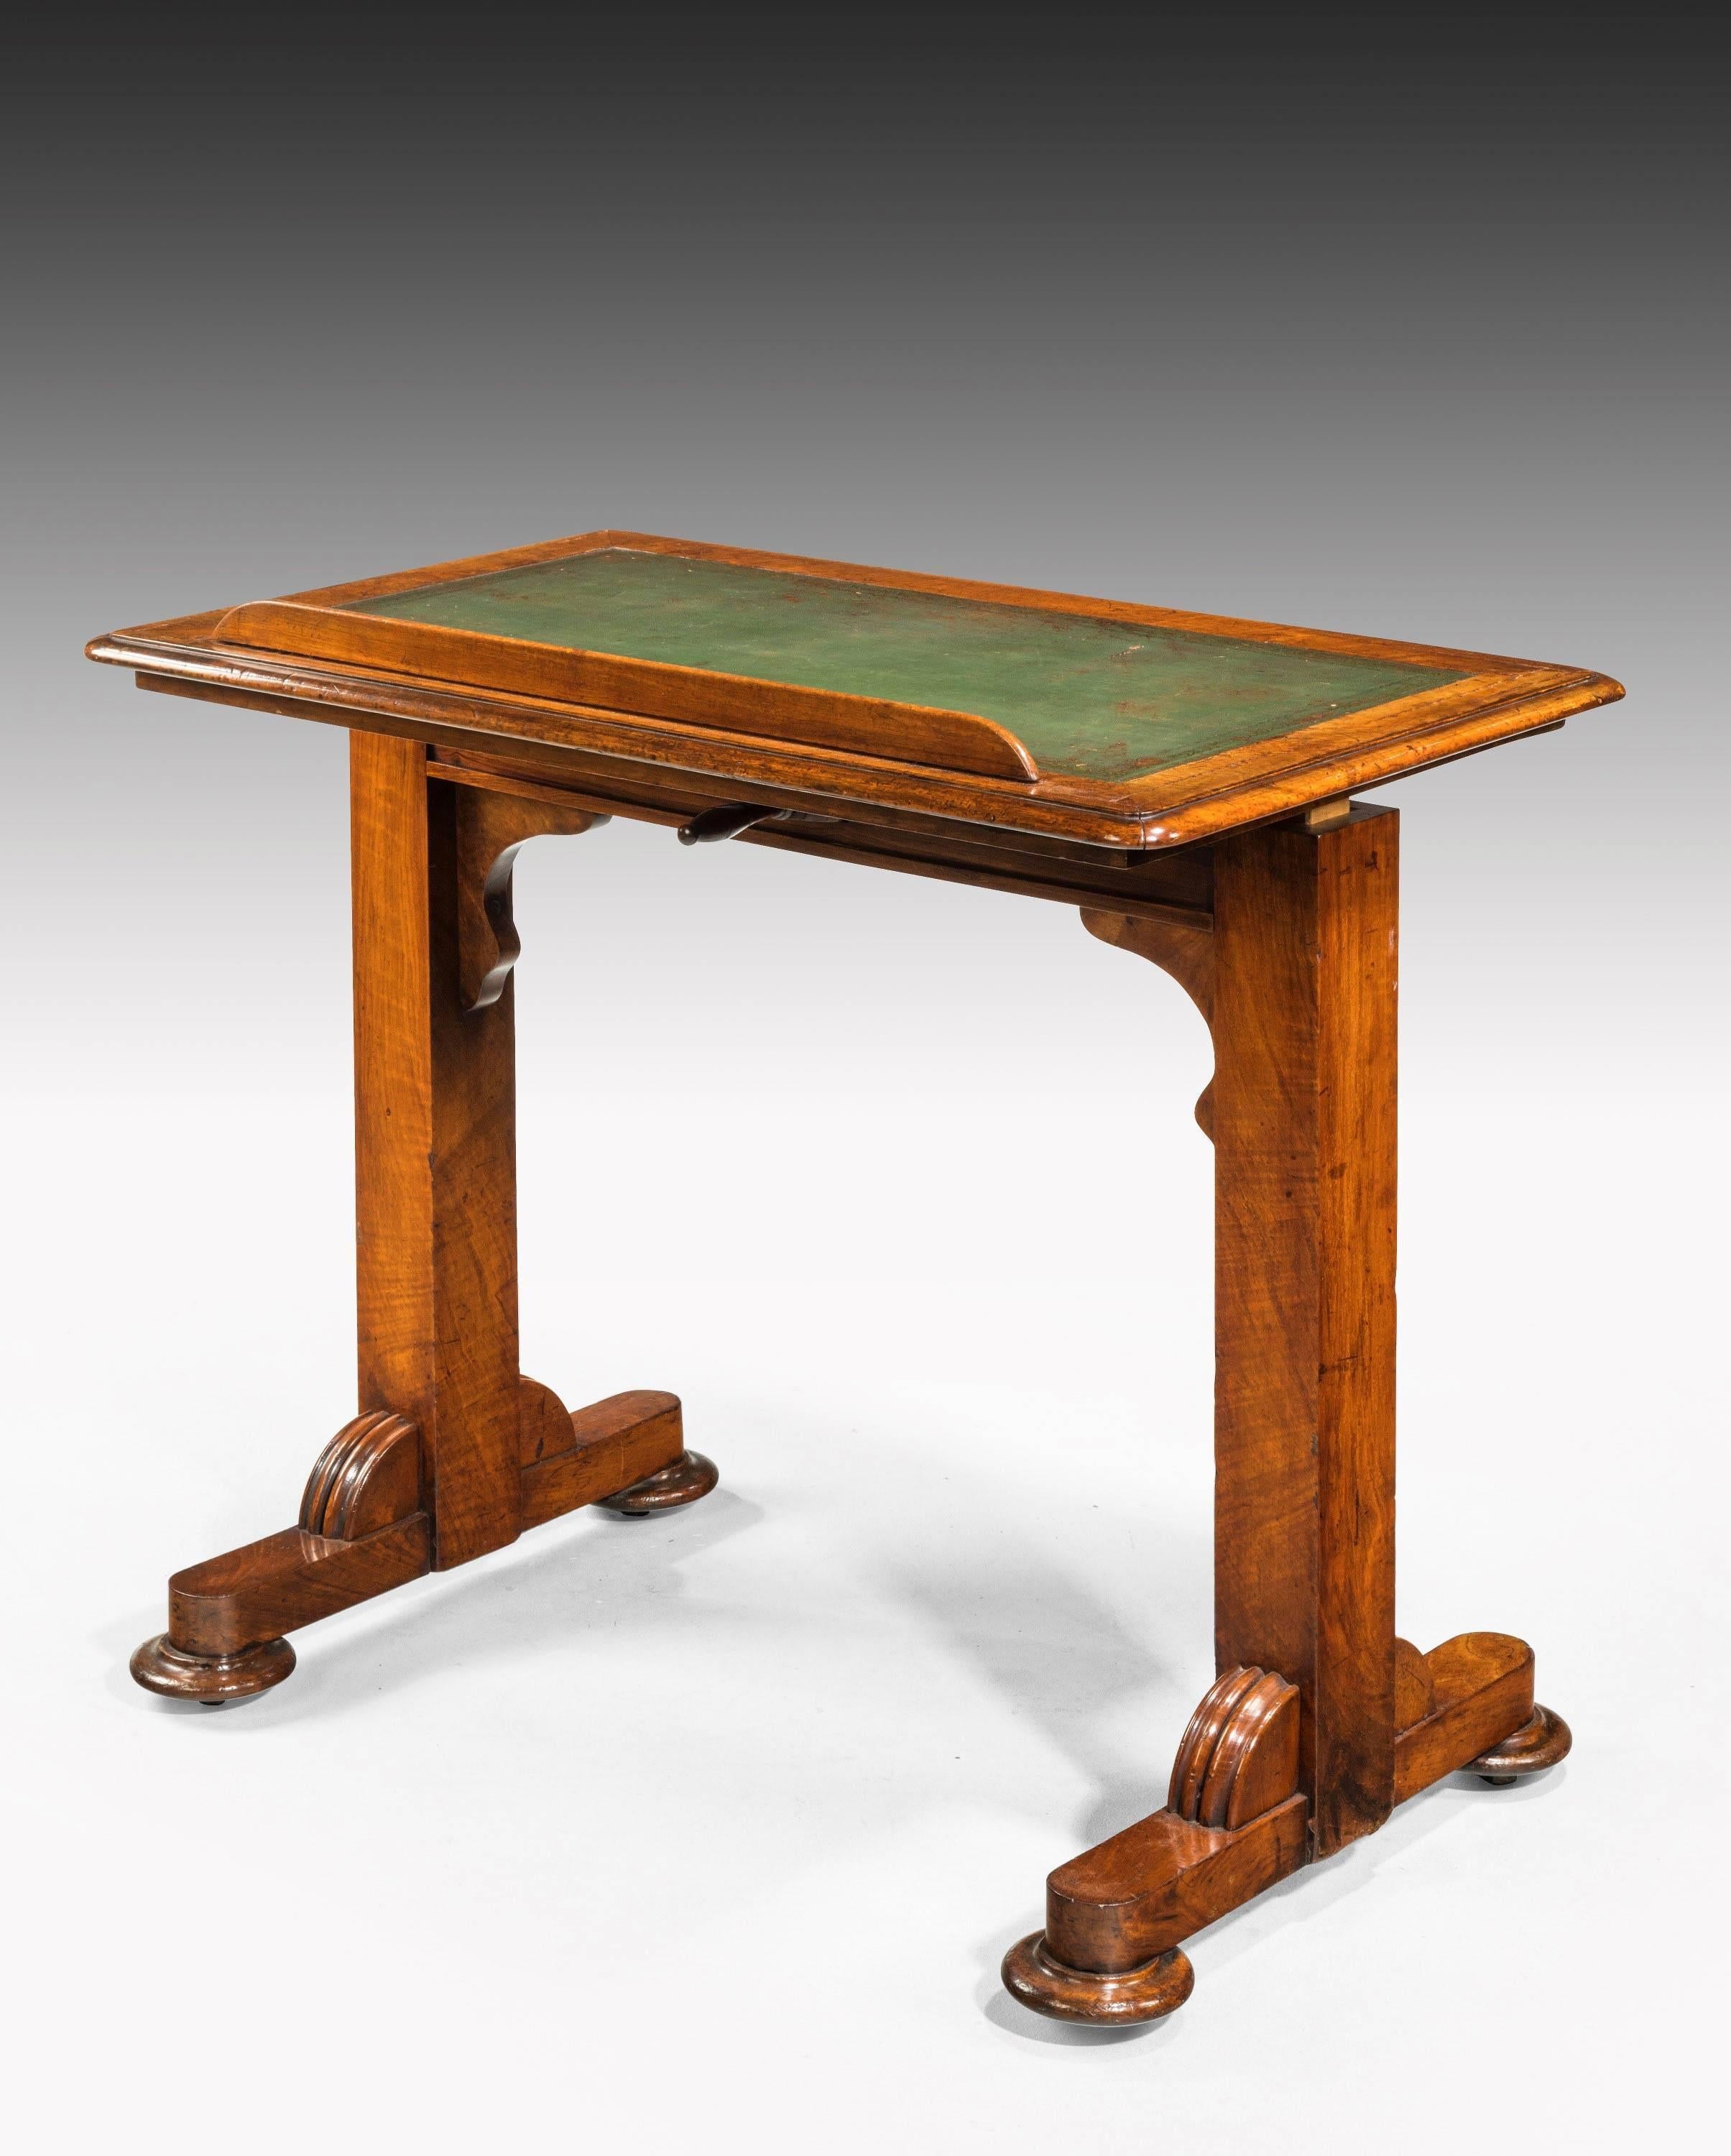 English Regency Period Mahogany Writing Table with a Sliding Height Mechanism